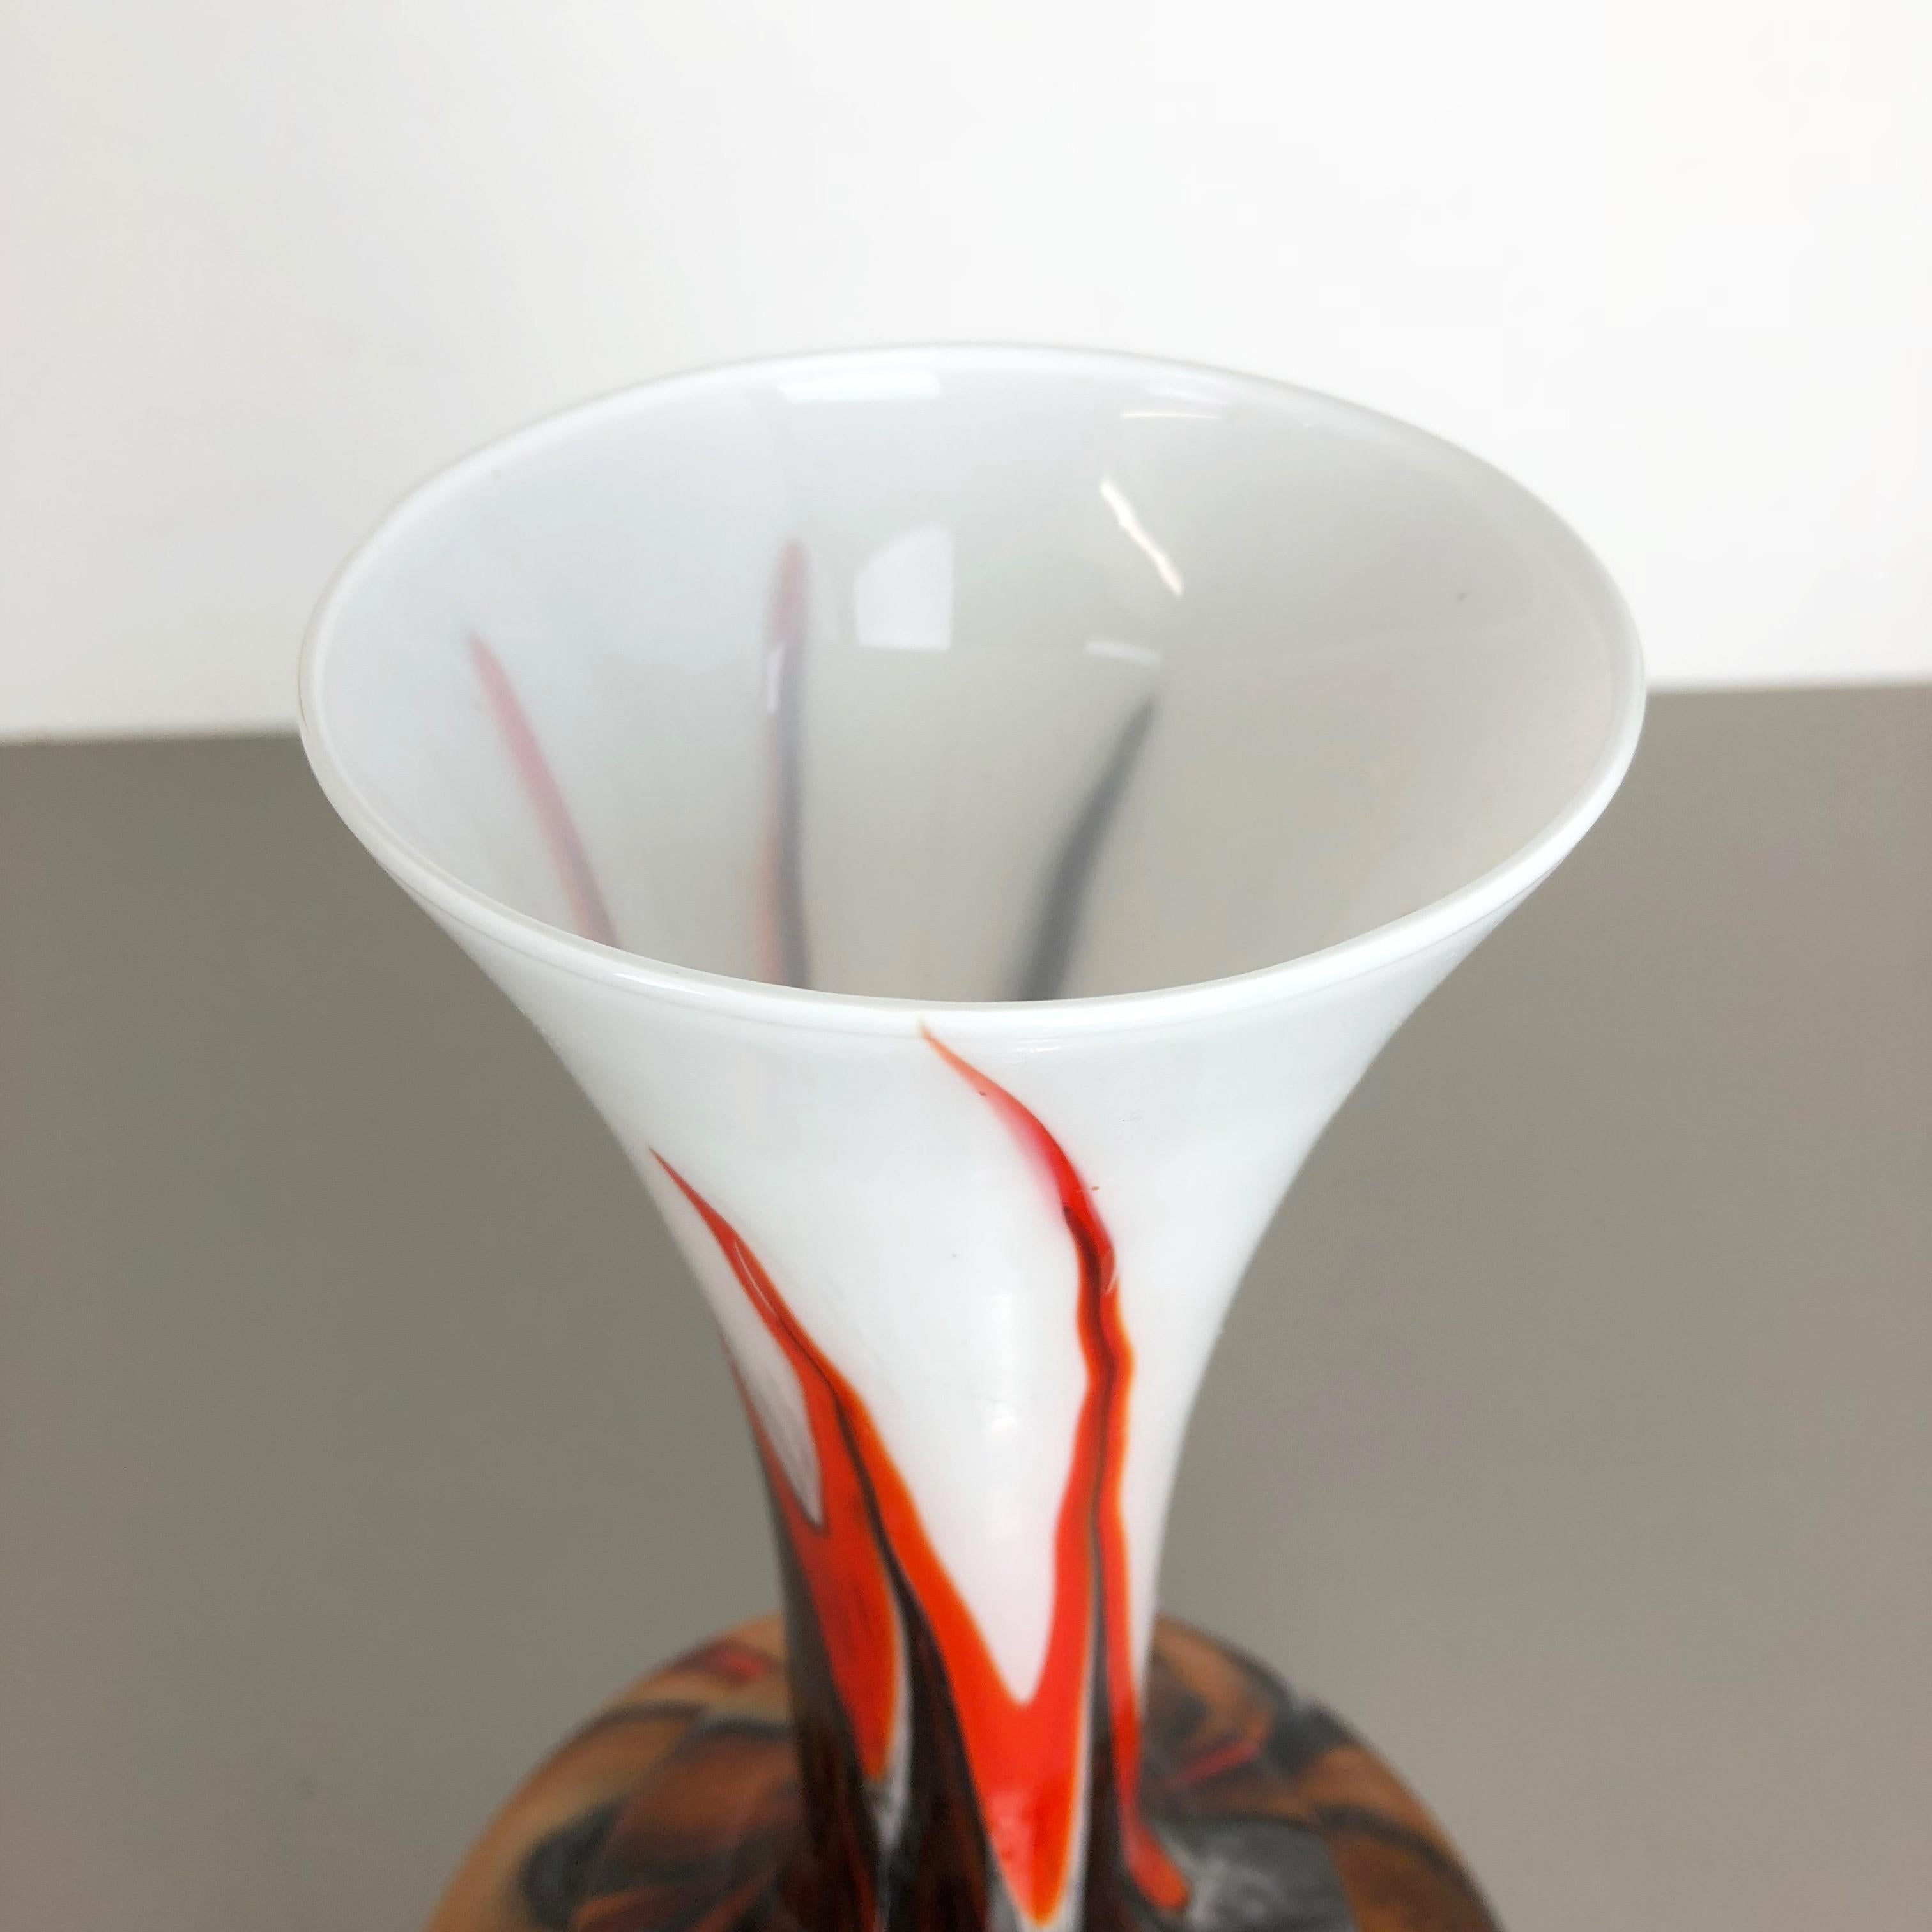 20th Century Rare Extra Large Vintage Pop Art Opaline Florence Glass Vase Design, Italy For Sale